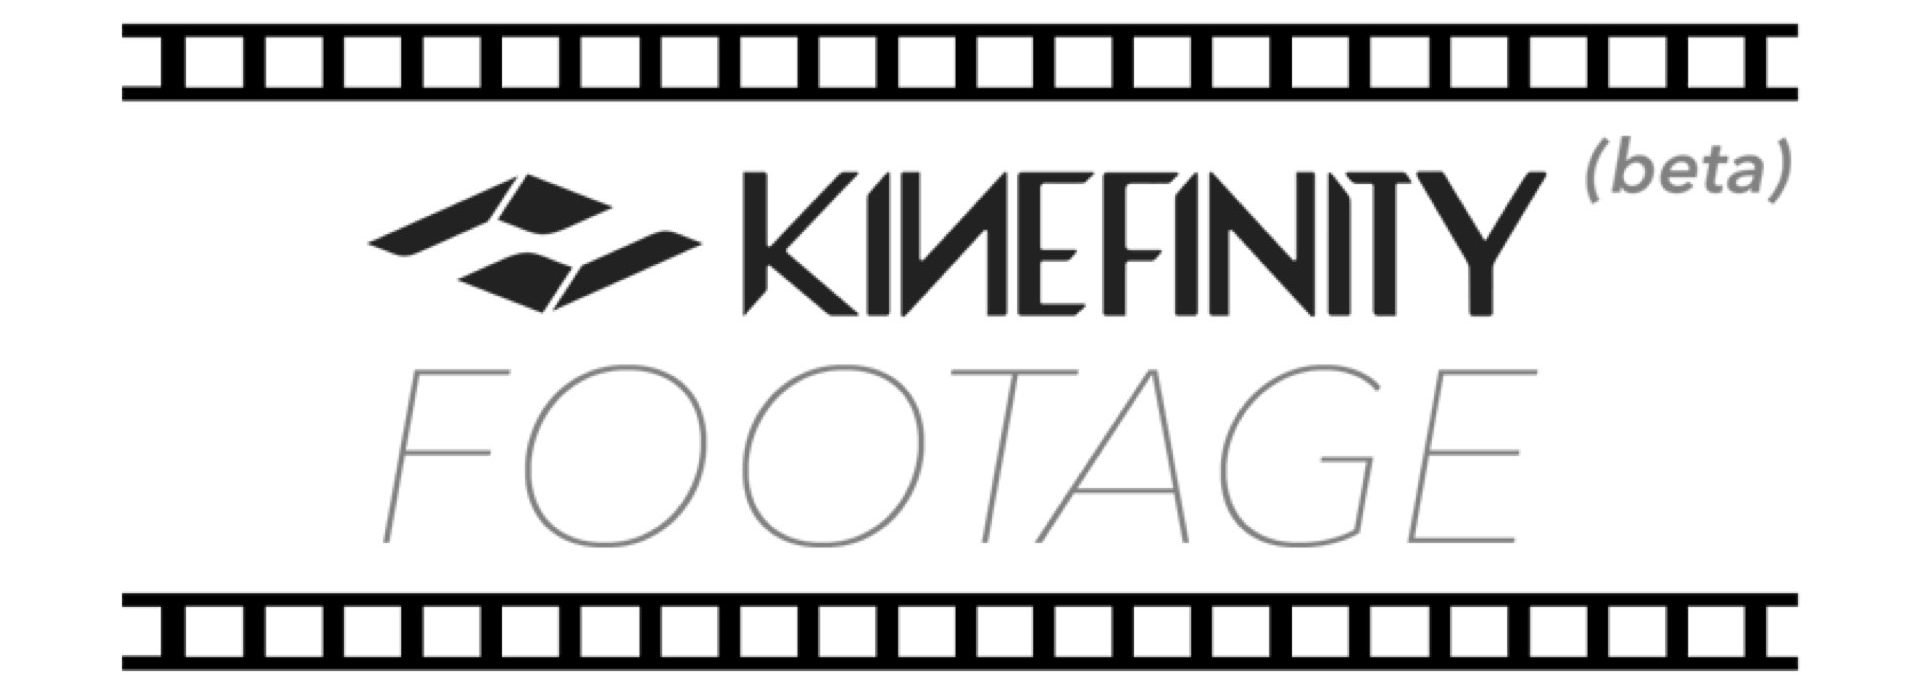 The Kinefinity Footage project